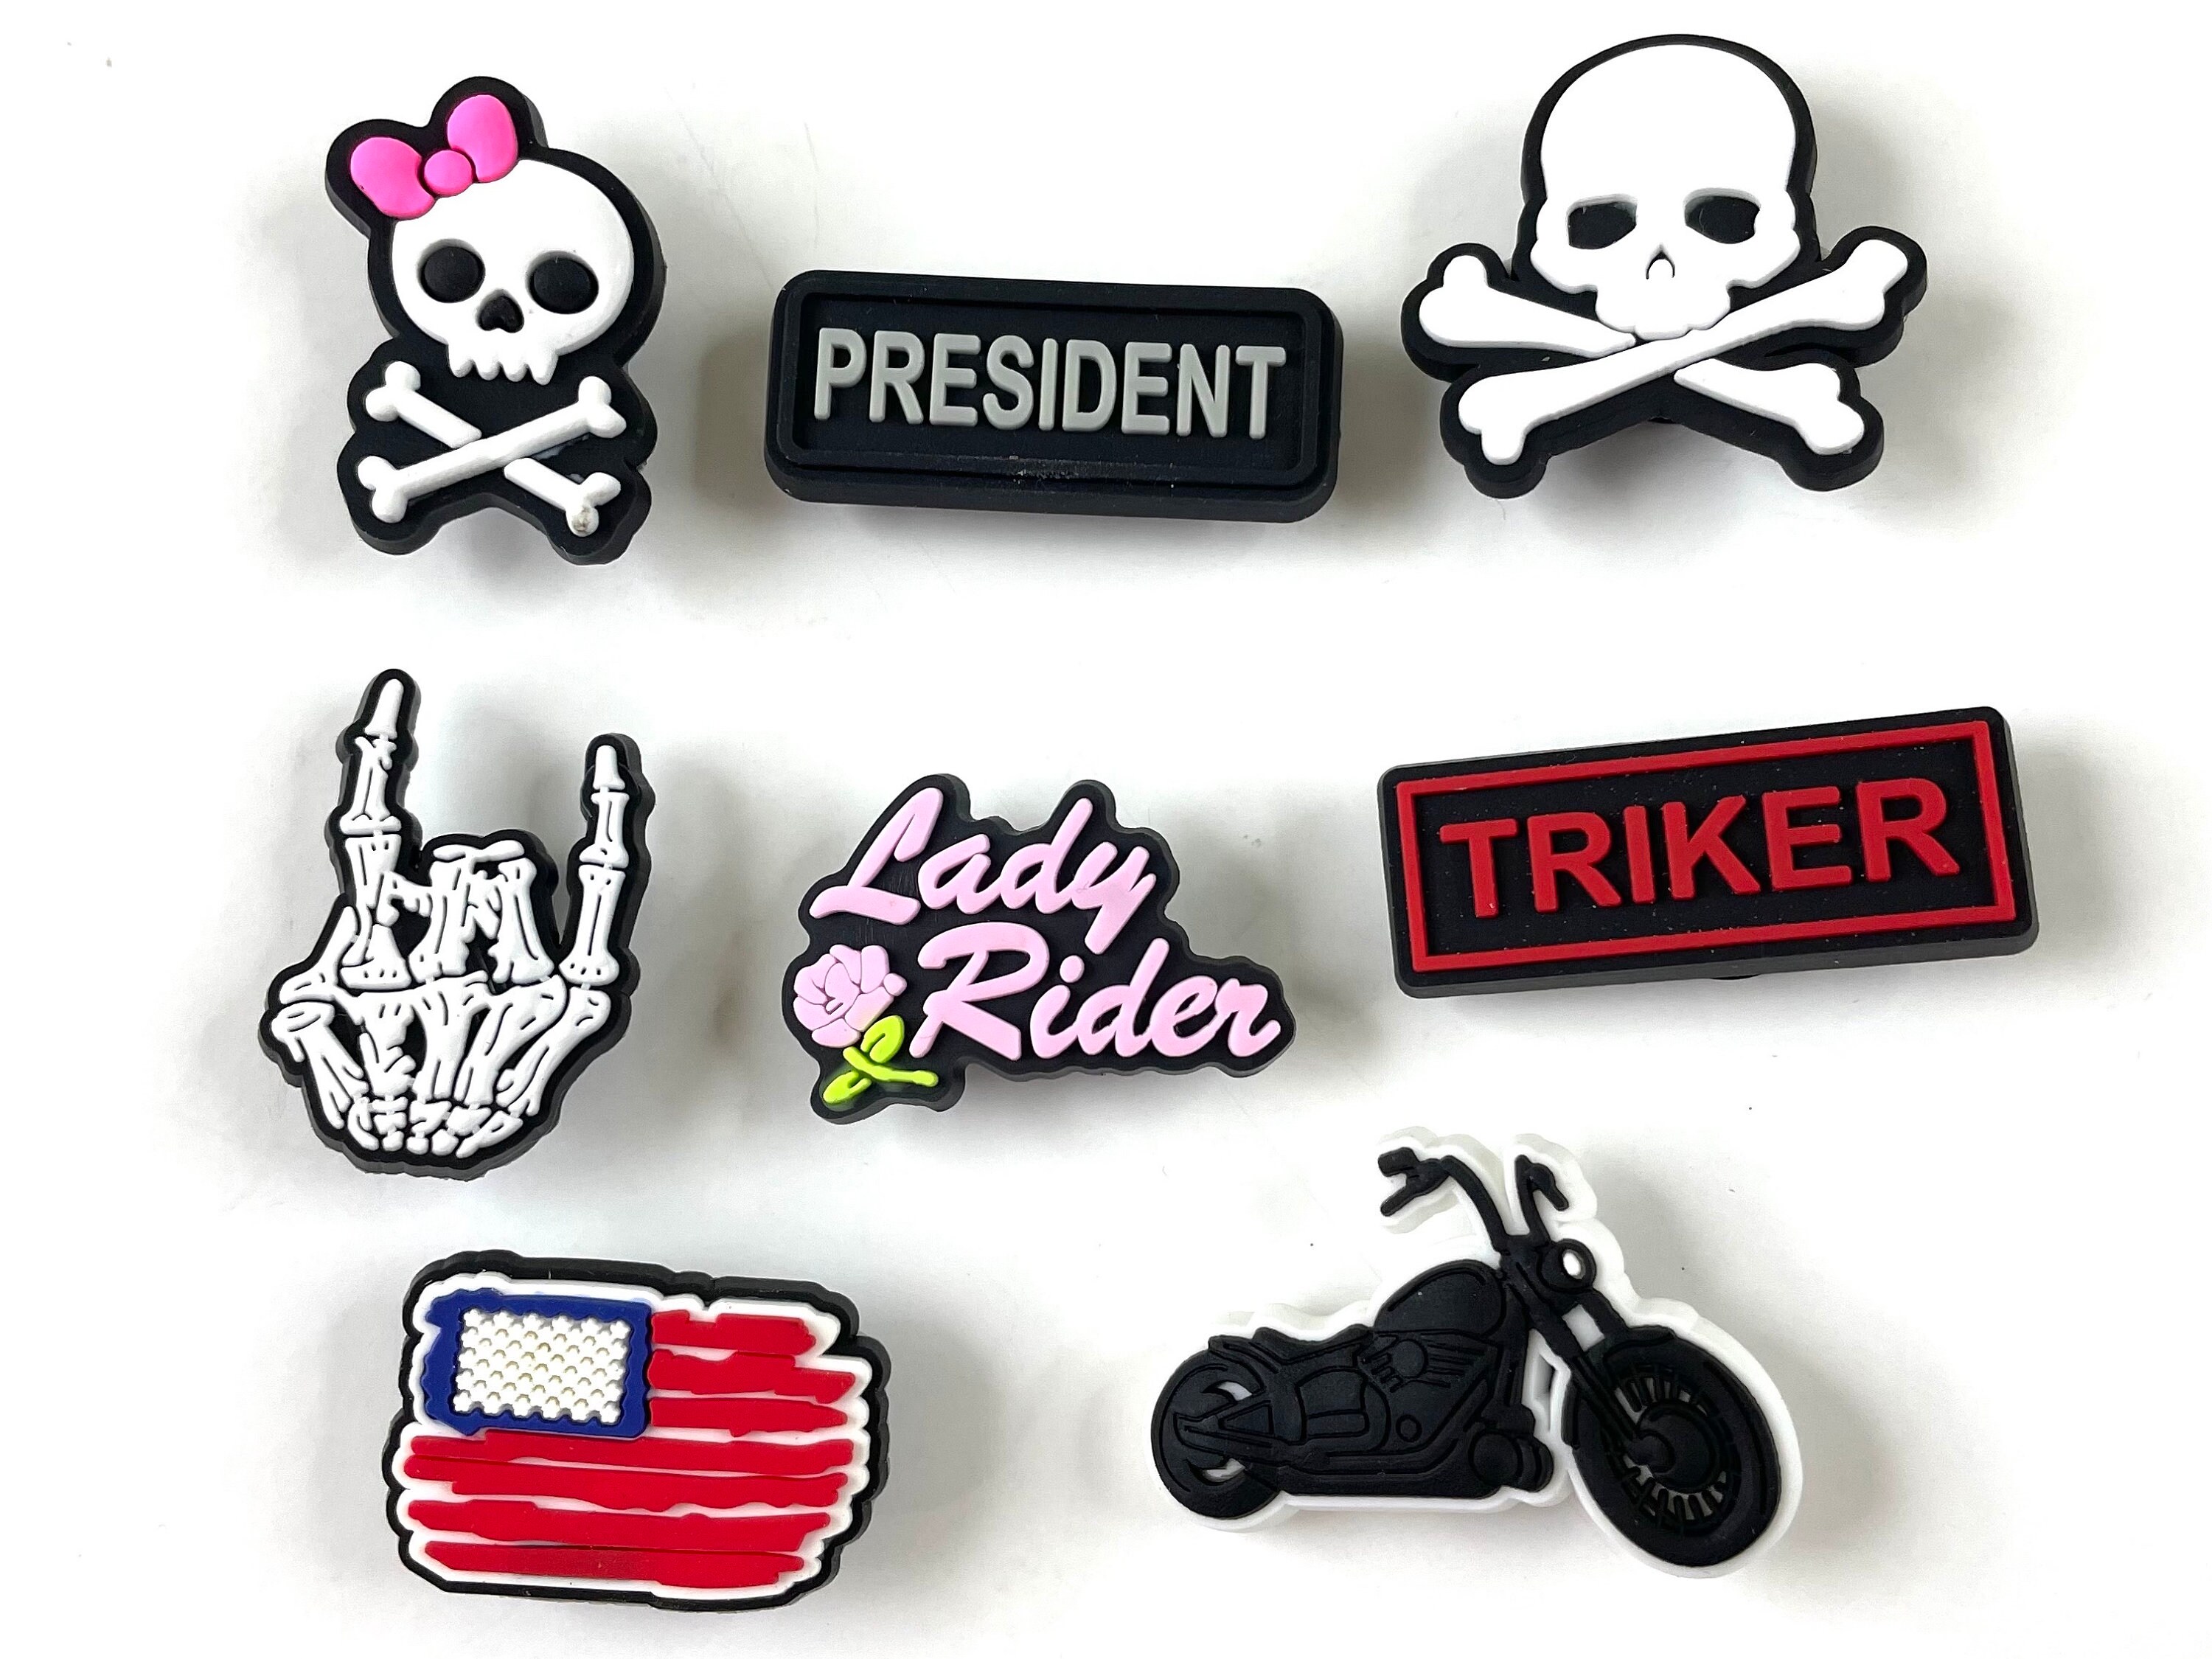 Generic son of anarchy stickers, moto, american club, anime, cosplay, by  moroccan otaku à prix pas cher